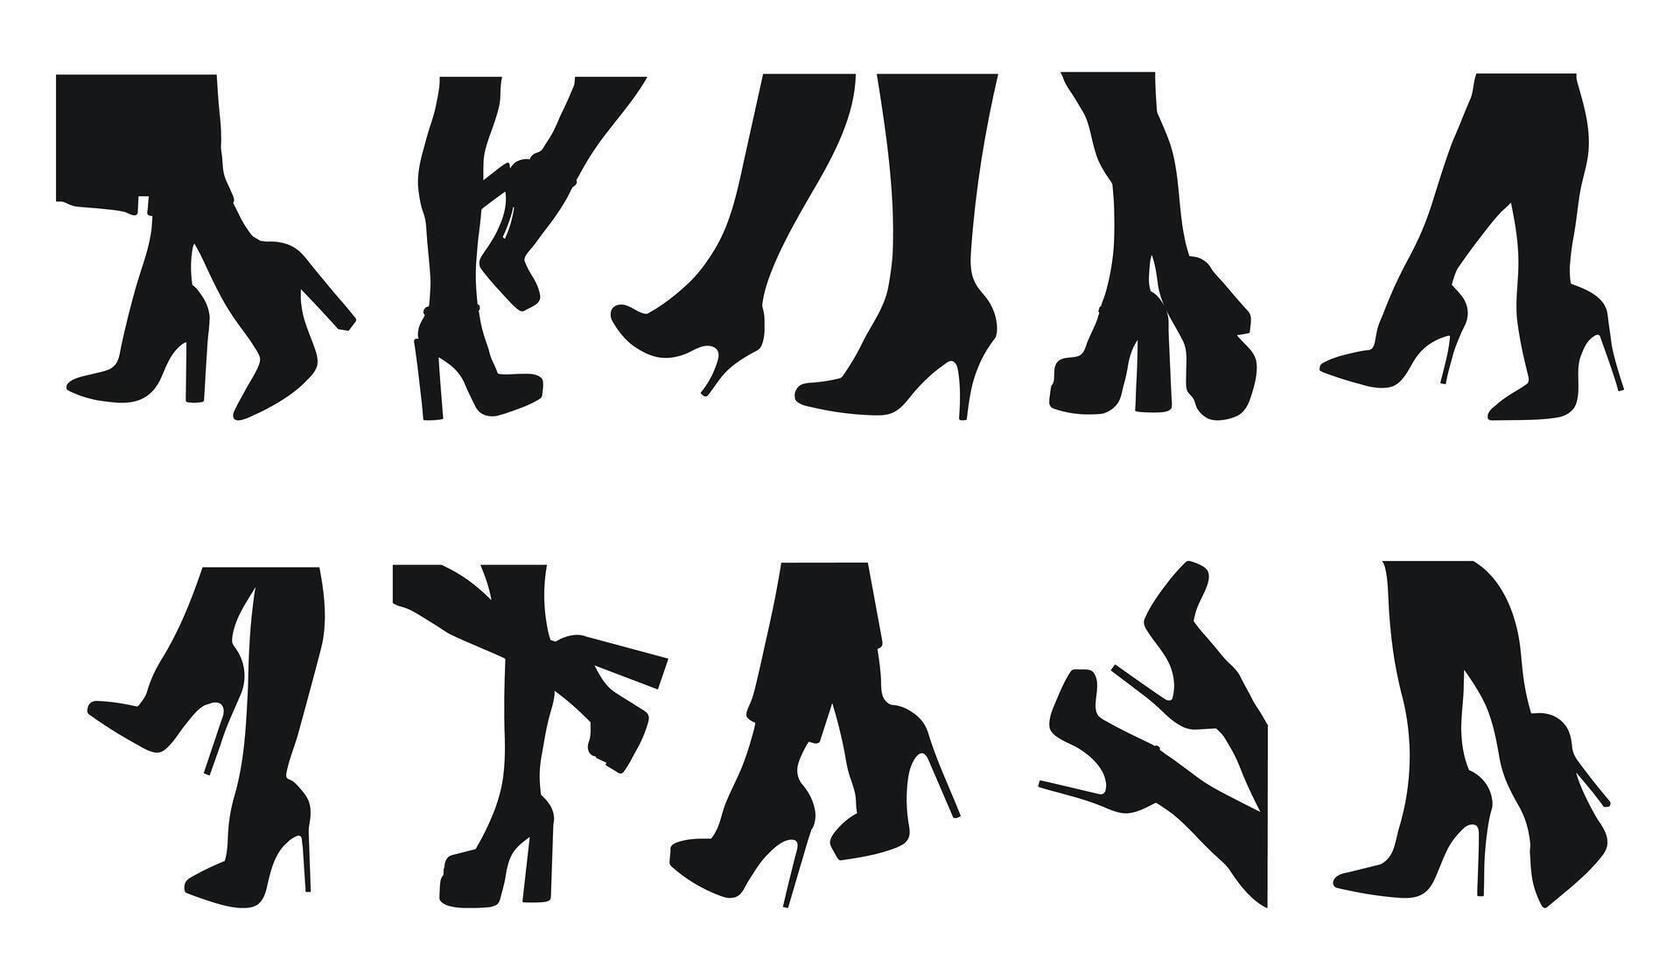 Set black silhouette of female legs in a pose. Shoes stilettos, high heels. Walking, standing, running, jumping, dance vector